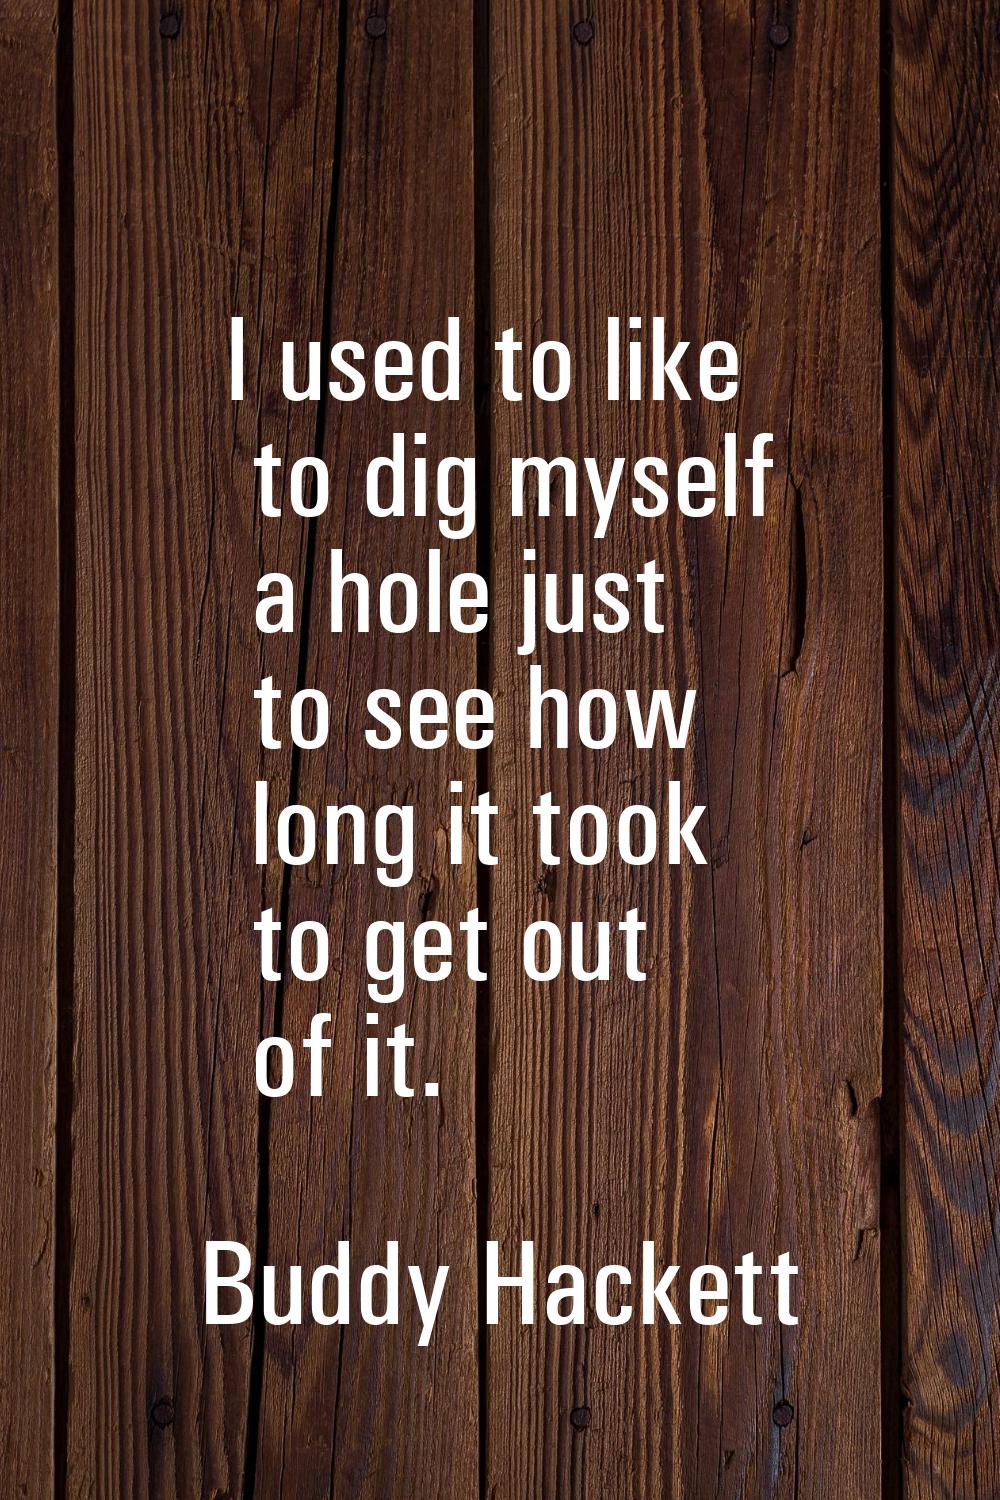 I used to like to dig myself a hole just to see how long it took to get out of it.